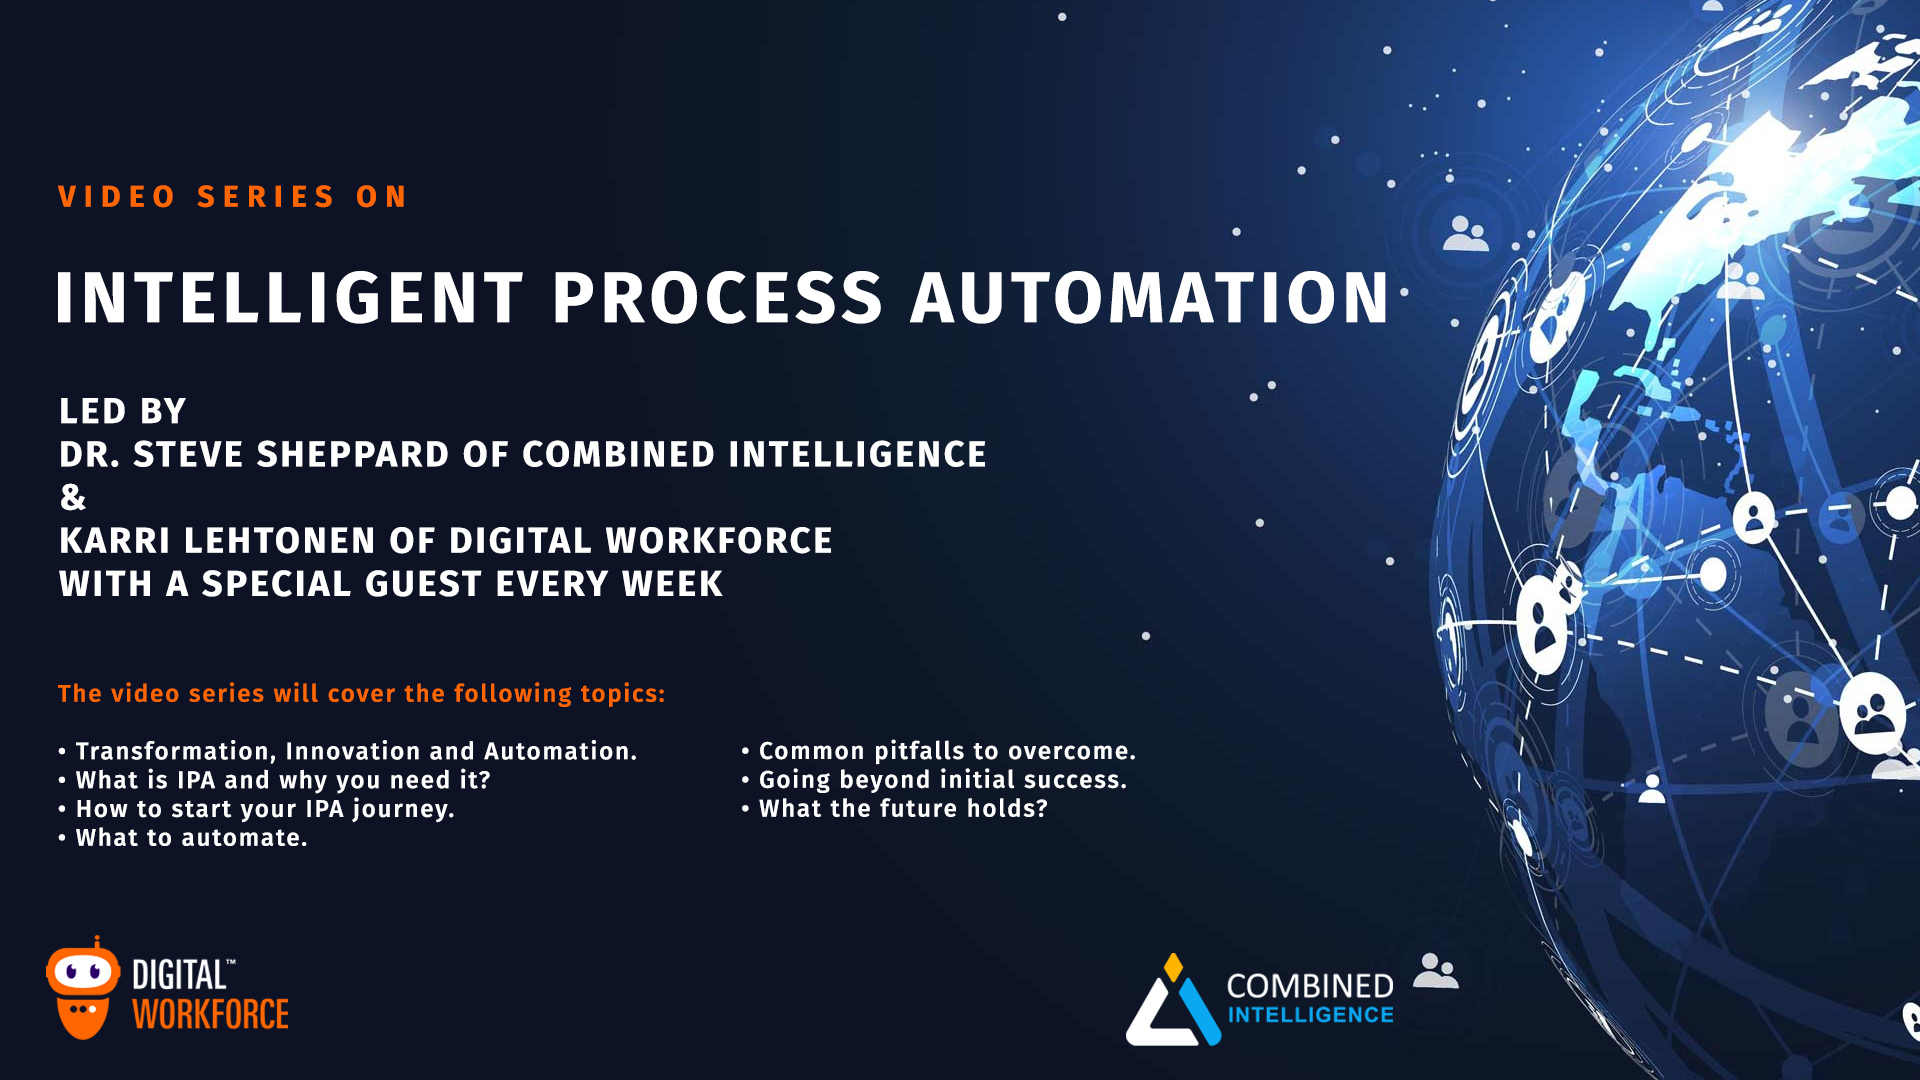 Intelligent Process Automation with Combined Intelligence and Digital Workforce